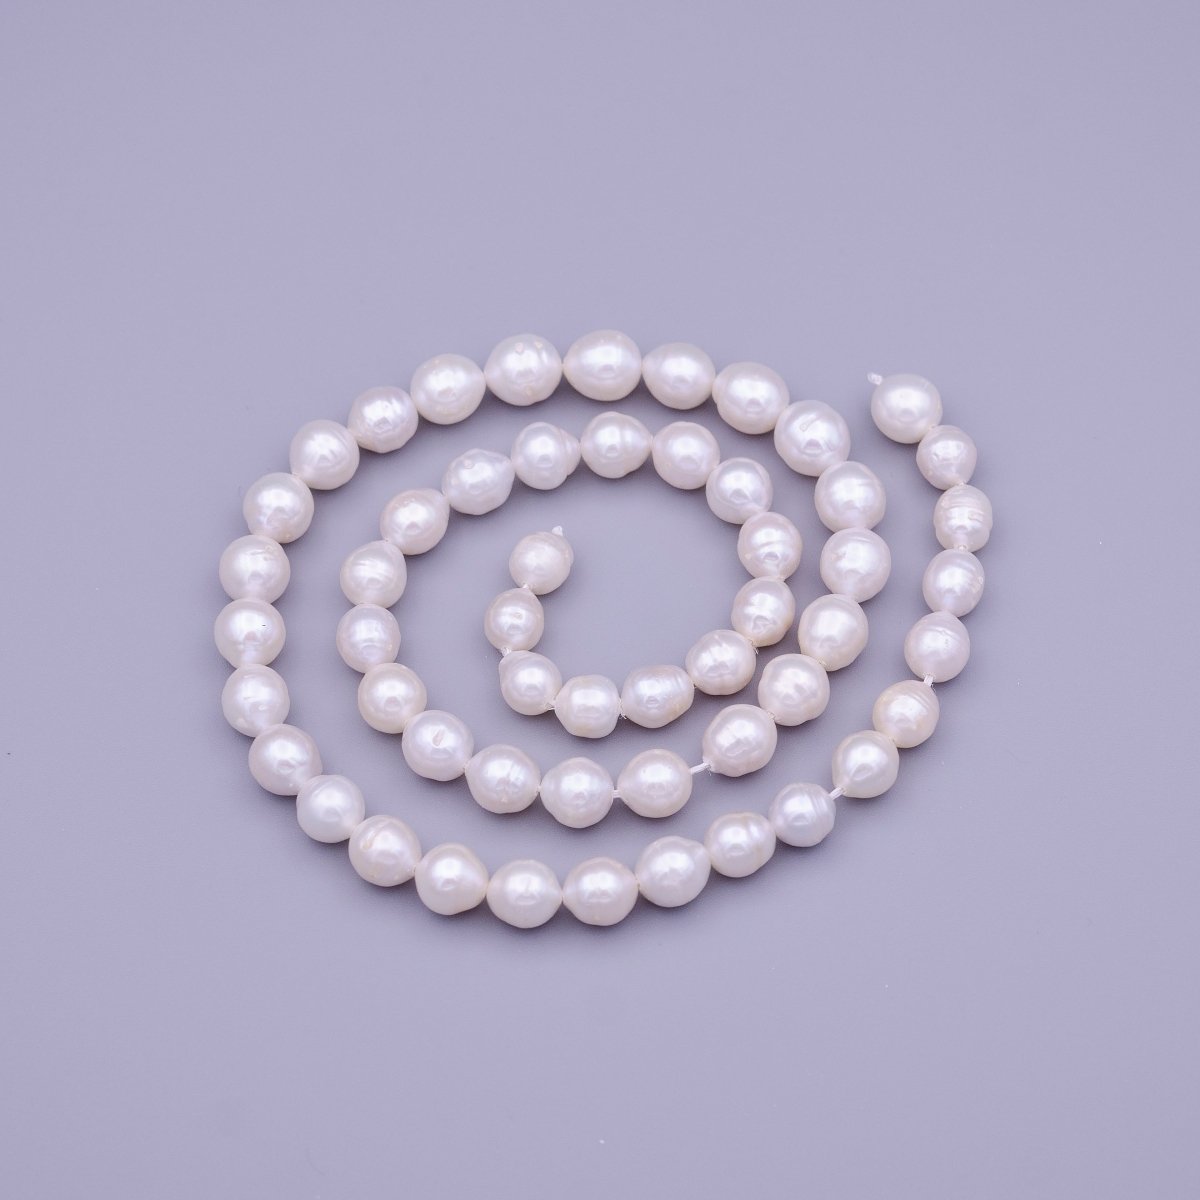 7mm AAA Natural White Freshwater Pearls 55pcs Full Strand | WA-1320 Clearance Pricing - DLUXCA